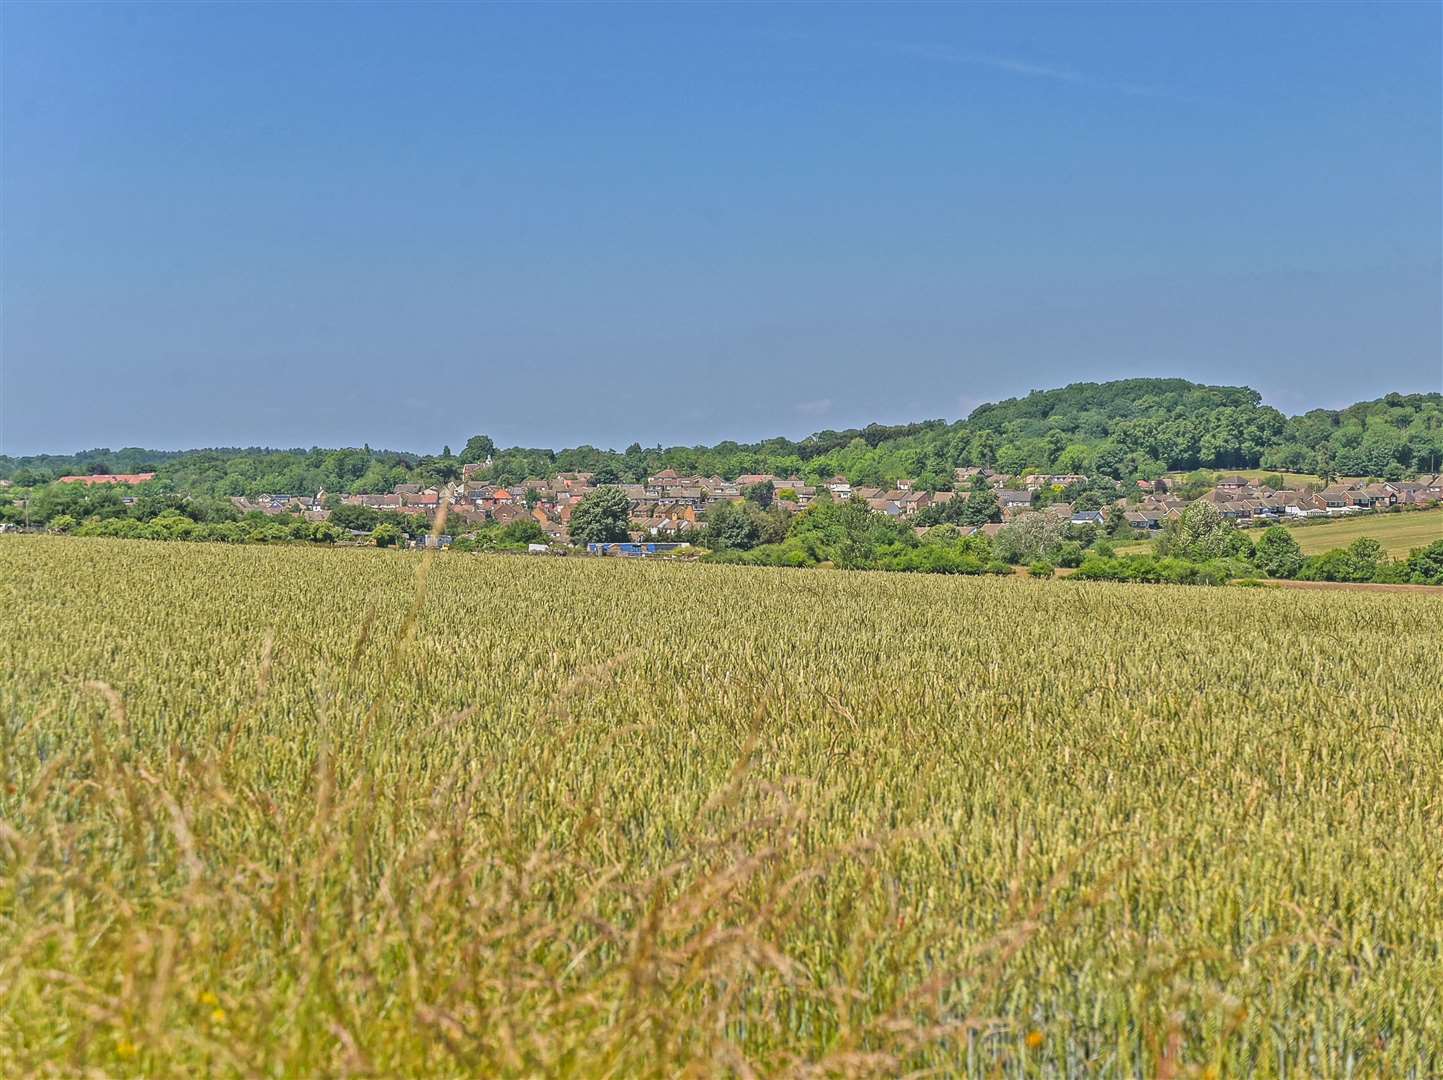 The land is listed for sale with an asking price of offers in excess of £3.175m. Photo: Hobbs Parker.